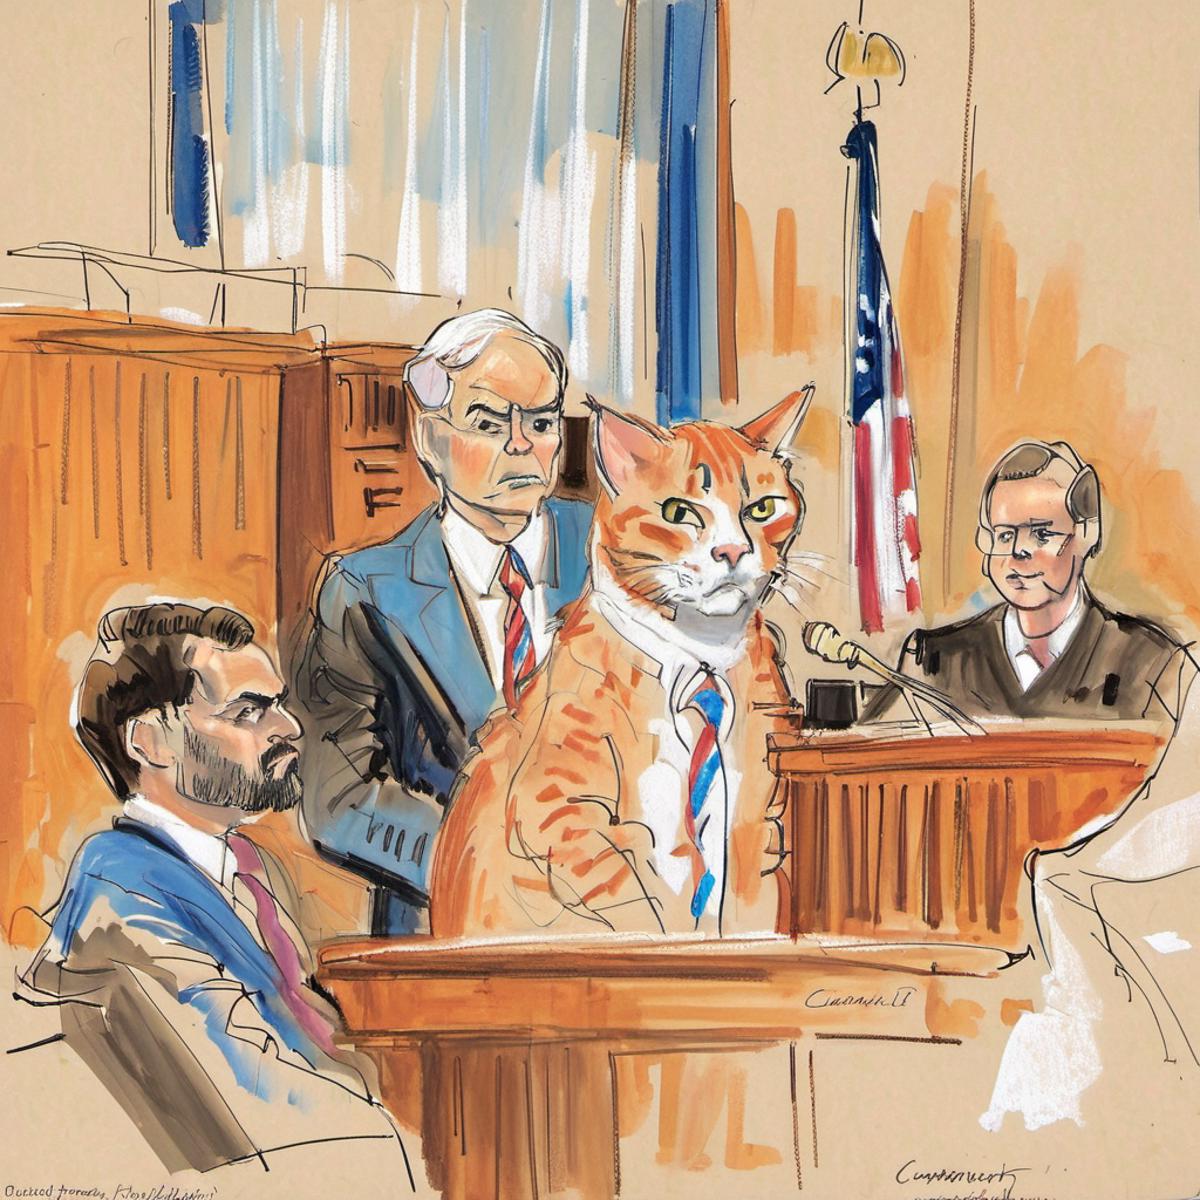 Courtroom Sketch Style image by glsvt